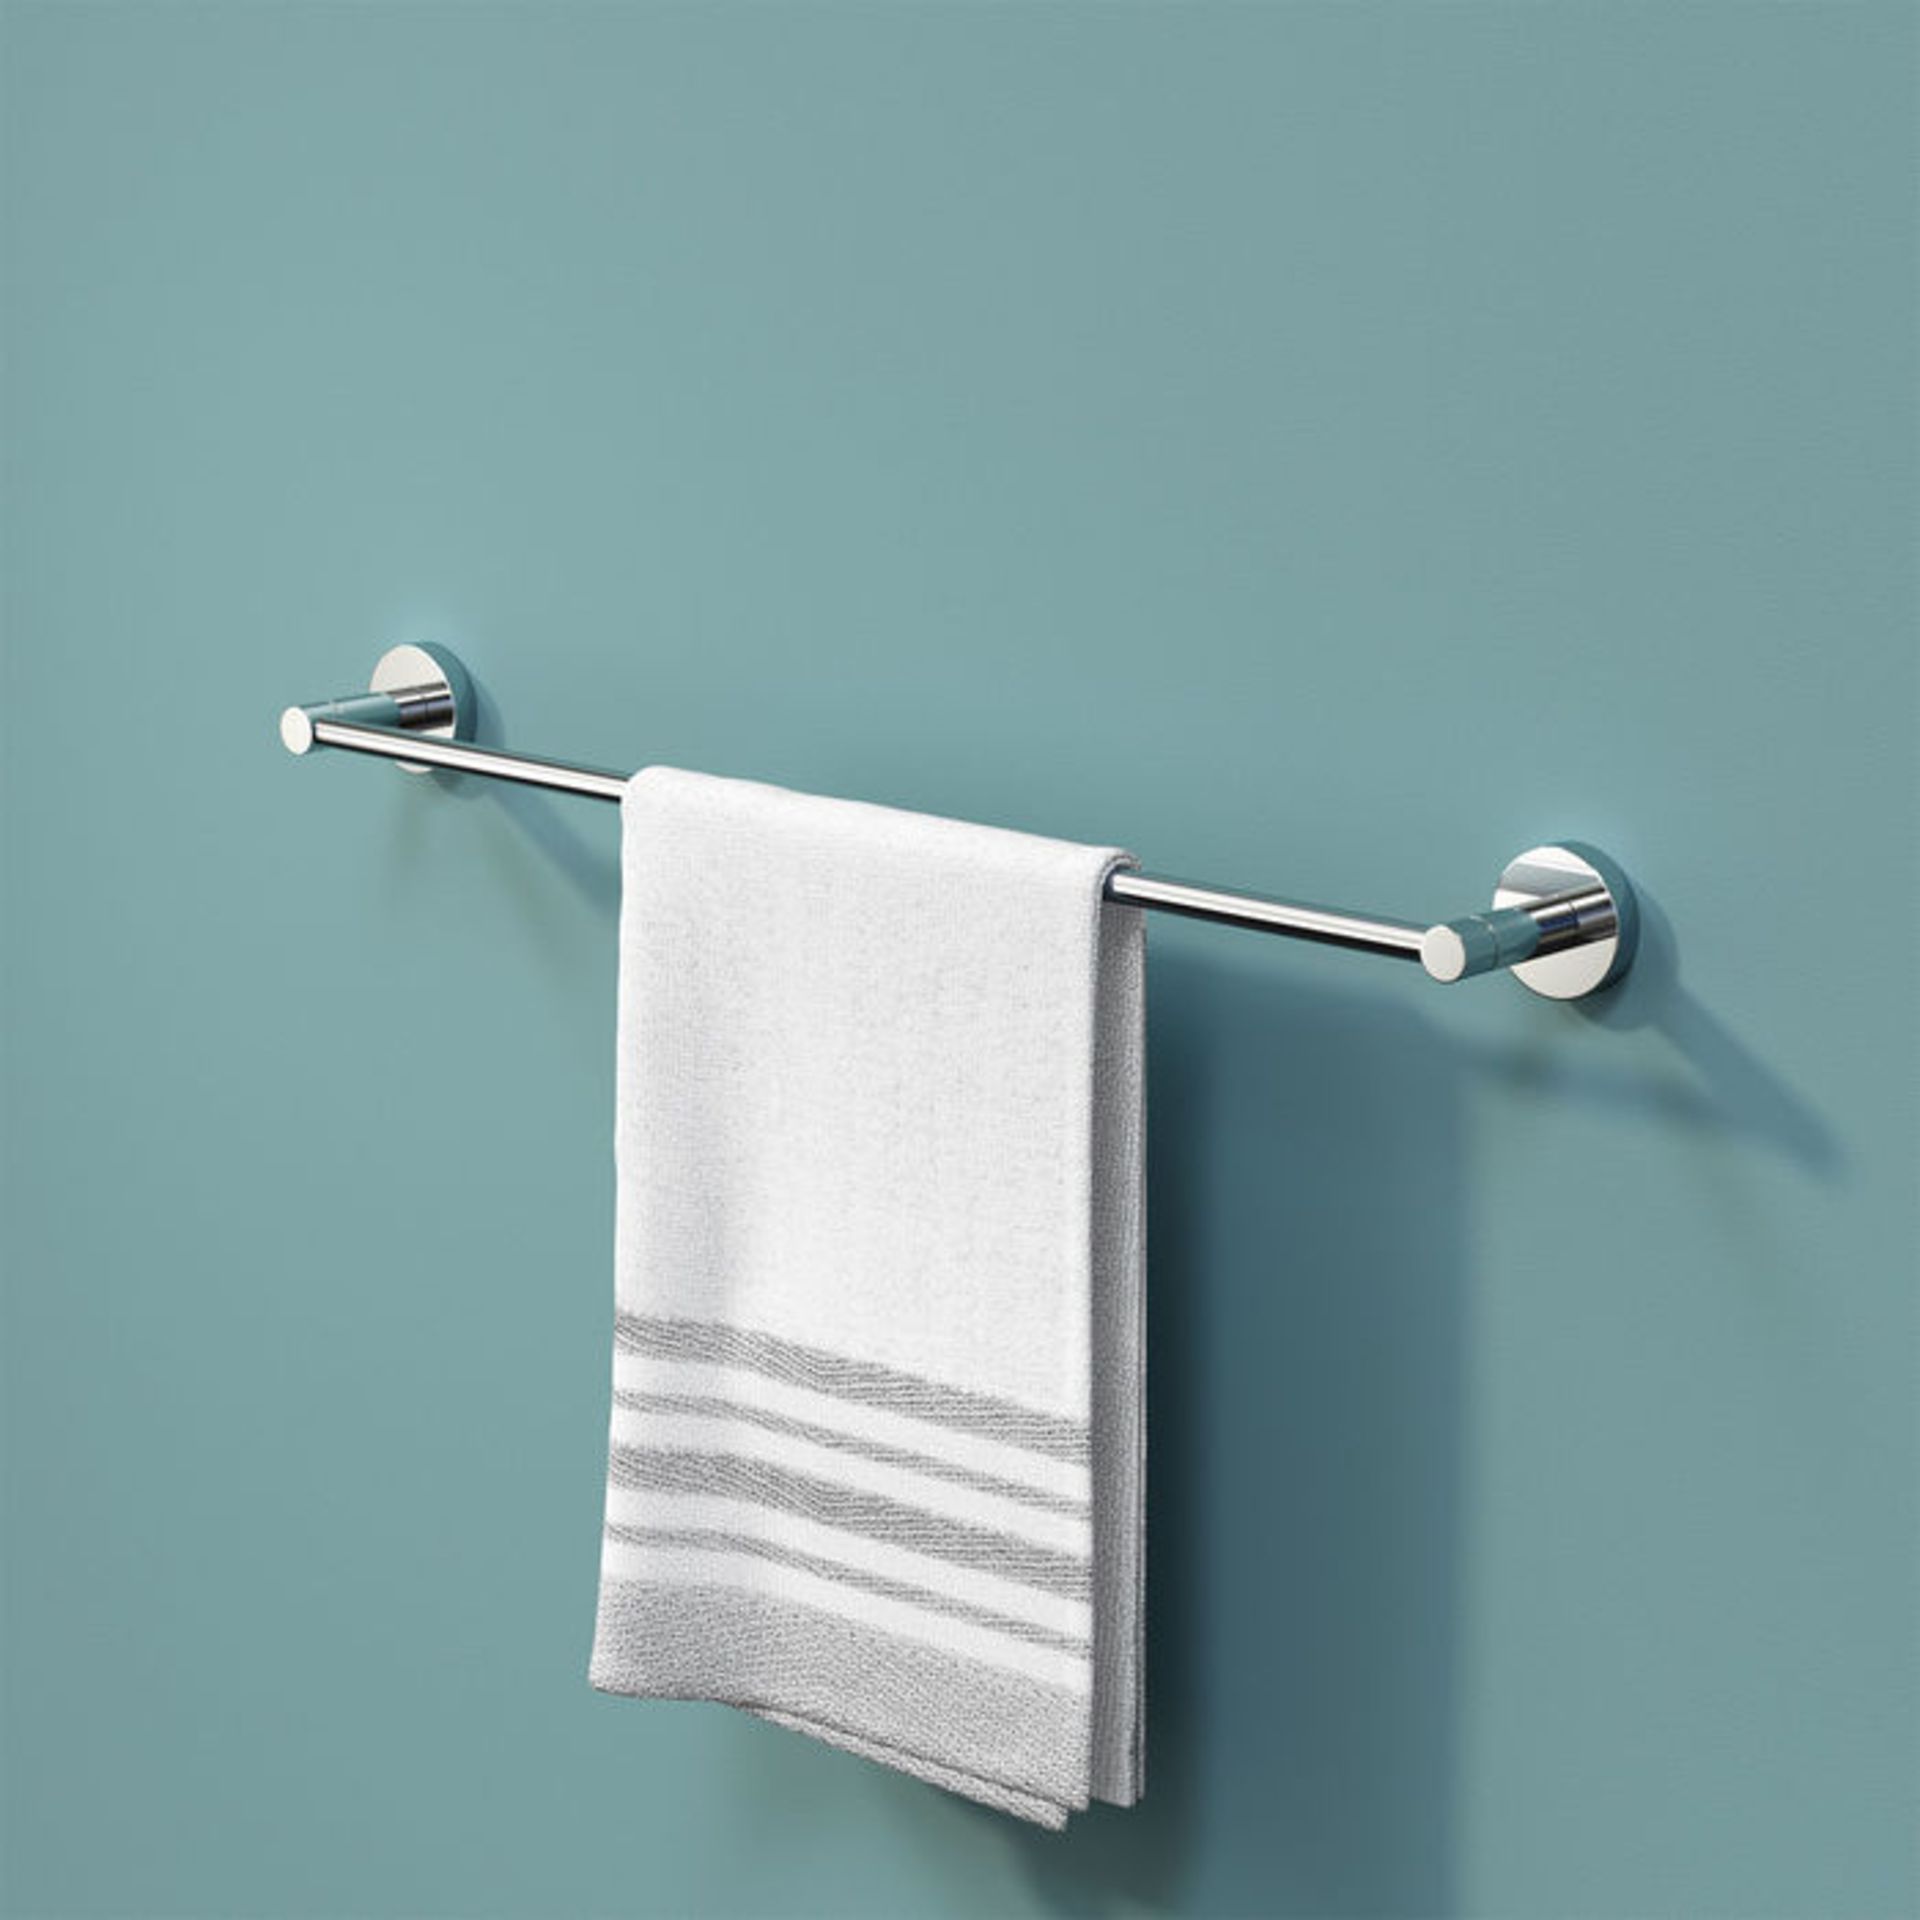 (MP19) Finsbury Towel Rail. Designed to conceal all fittings Completes your bathroom with a little